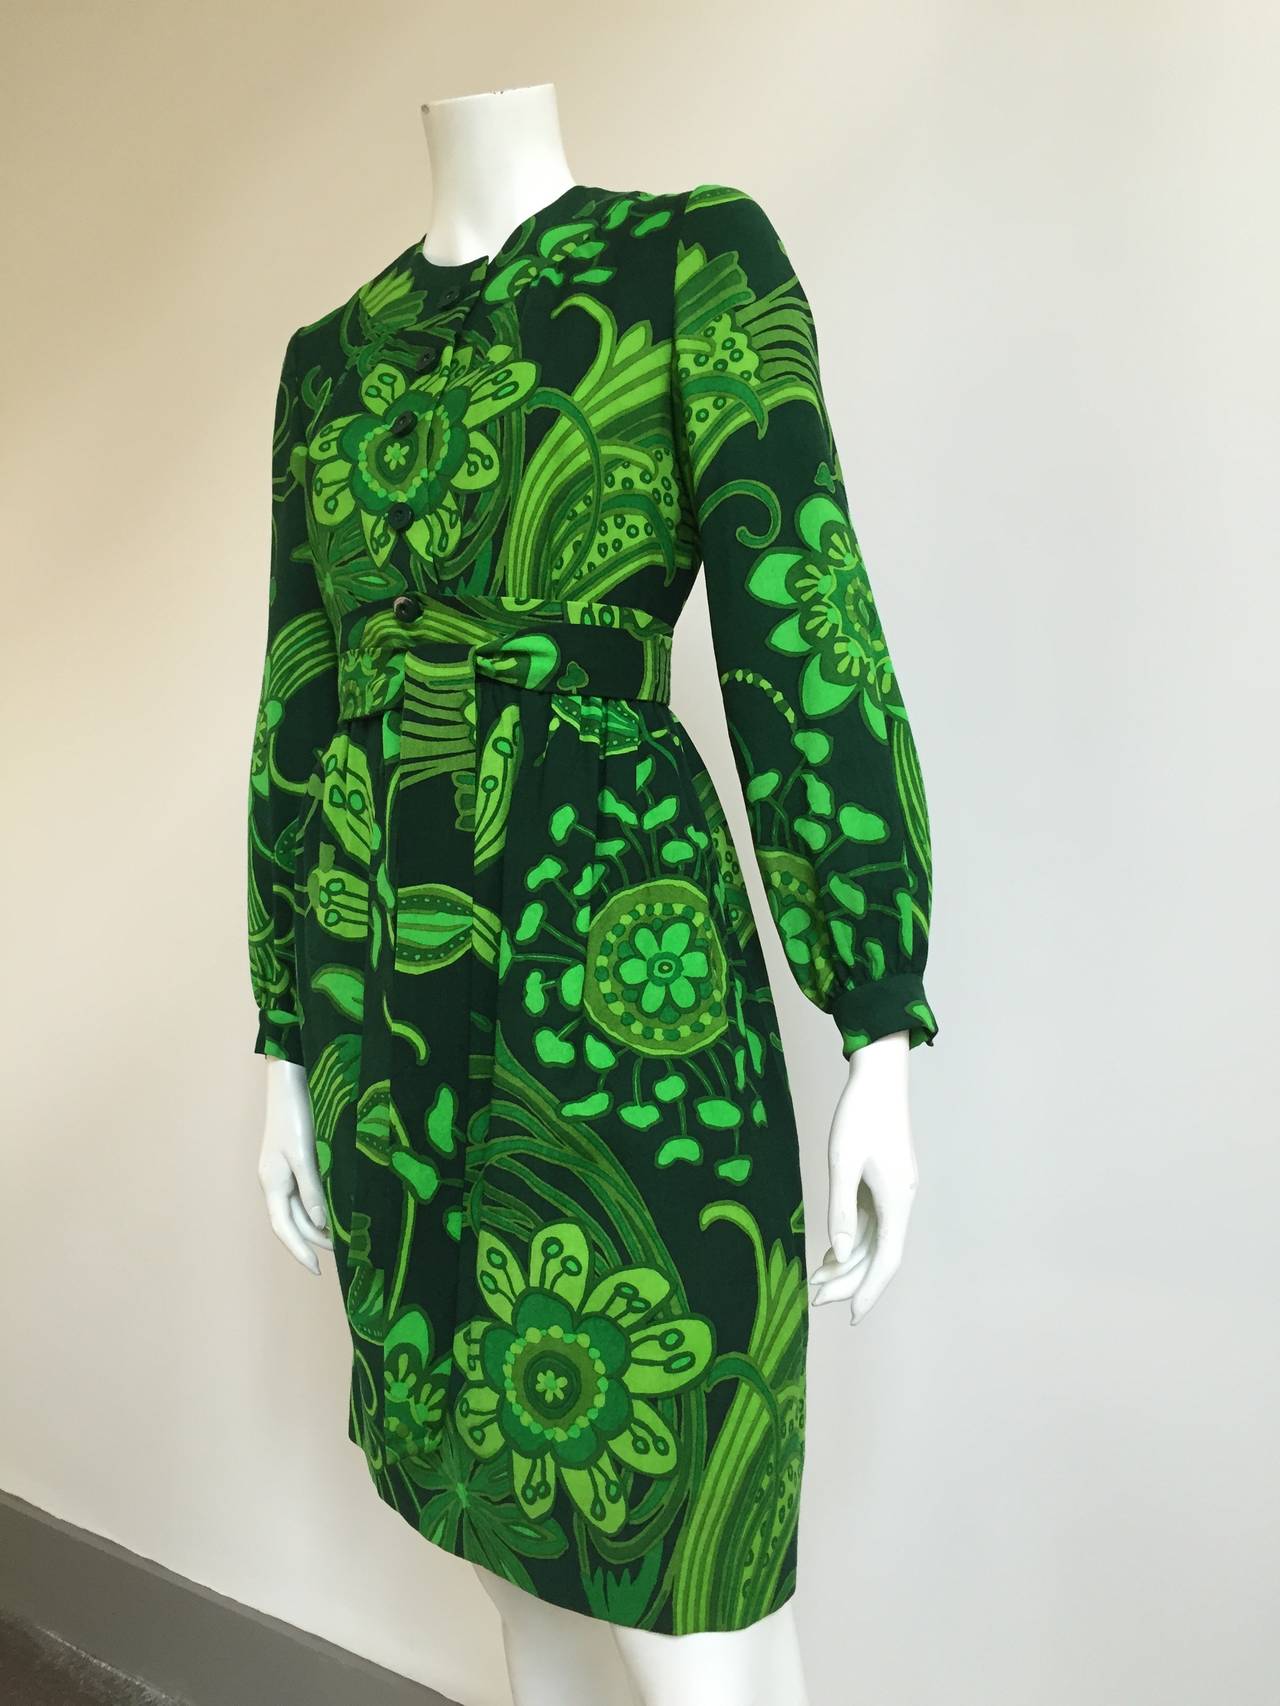 Blue Chester Weinberg 1960s Green Flower Dress with Pockets Size 6.